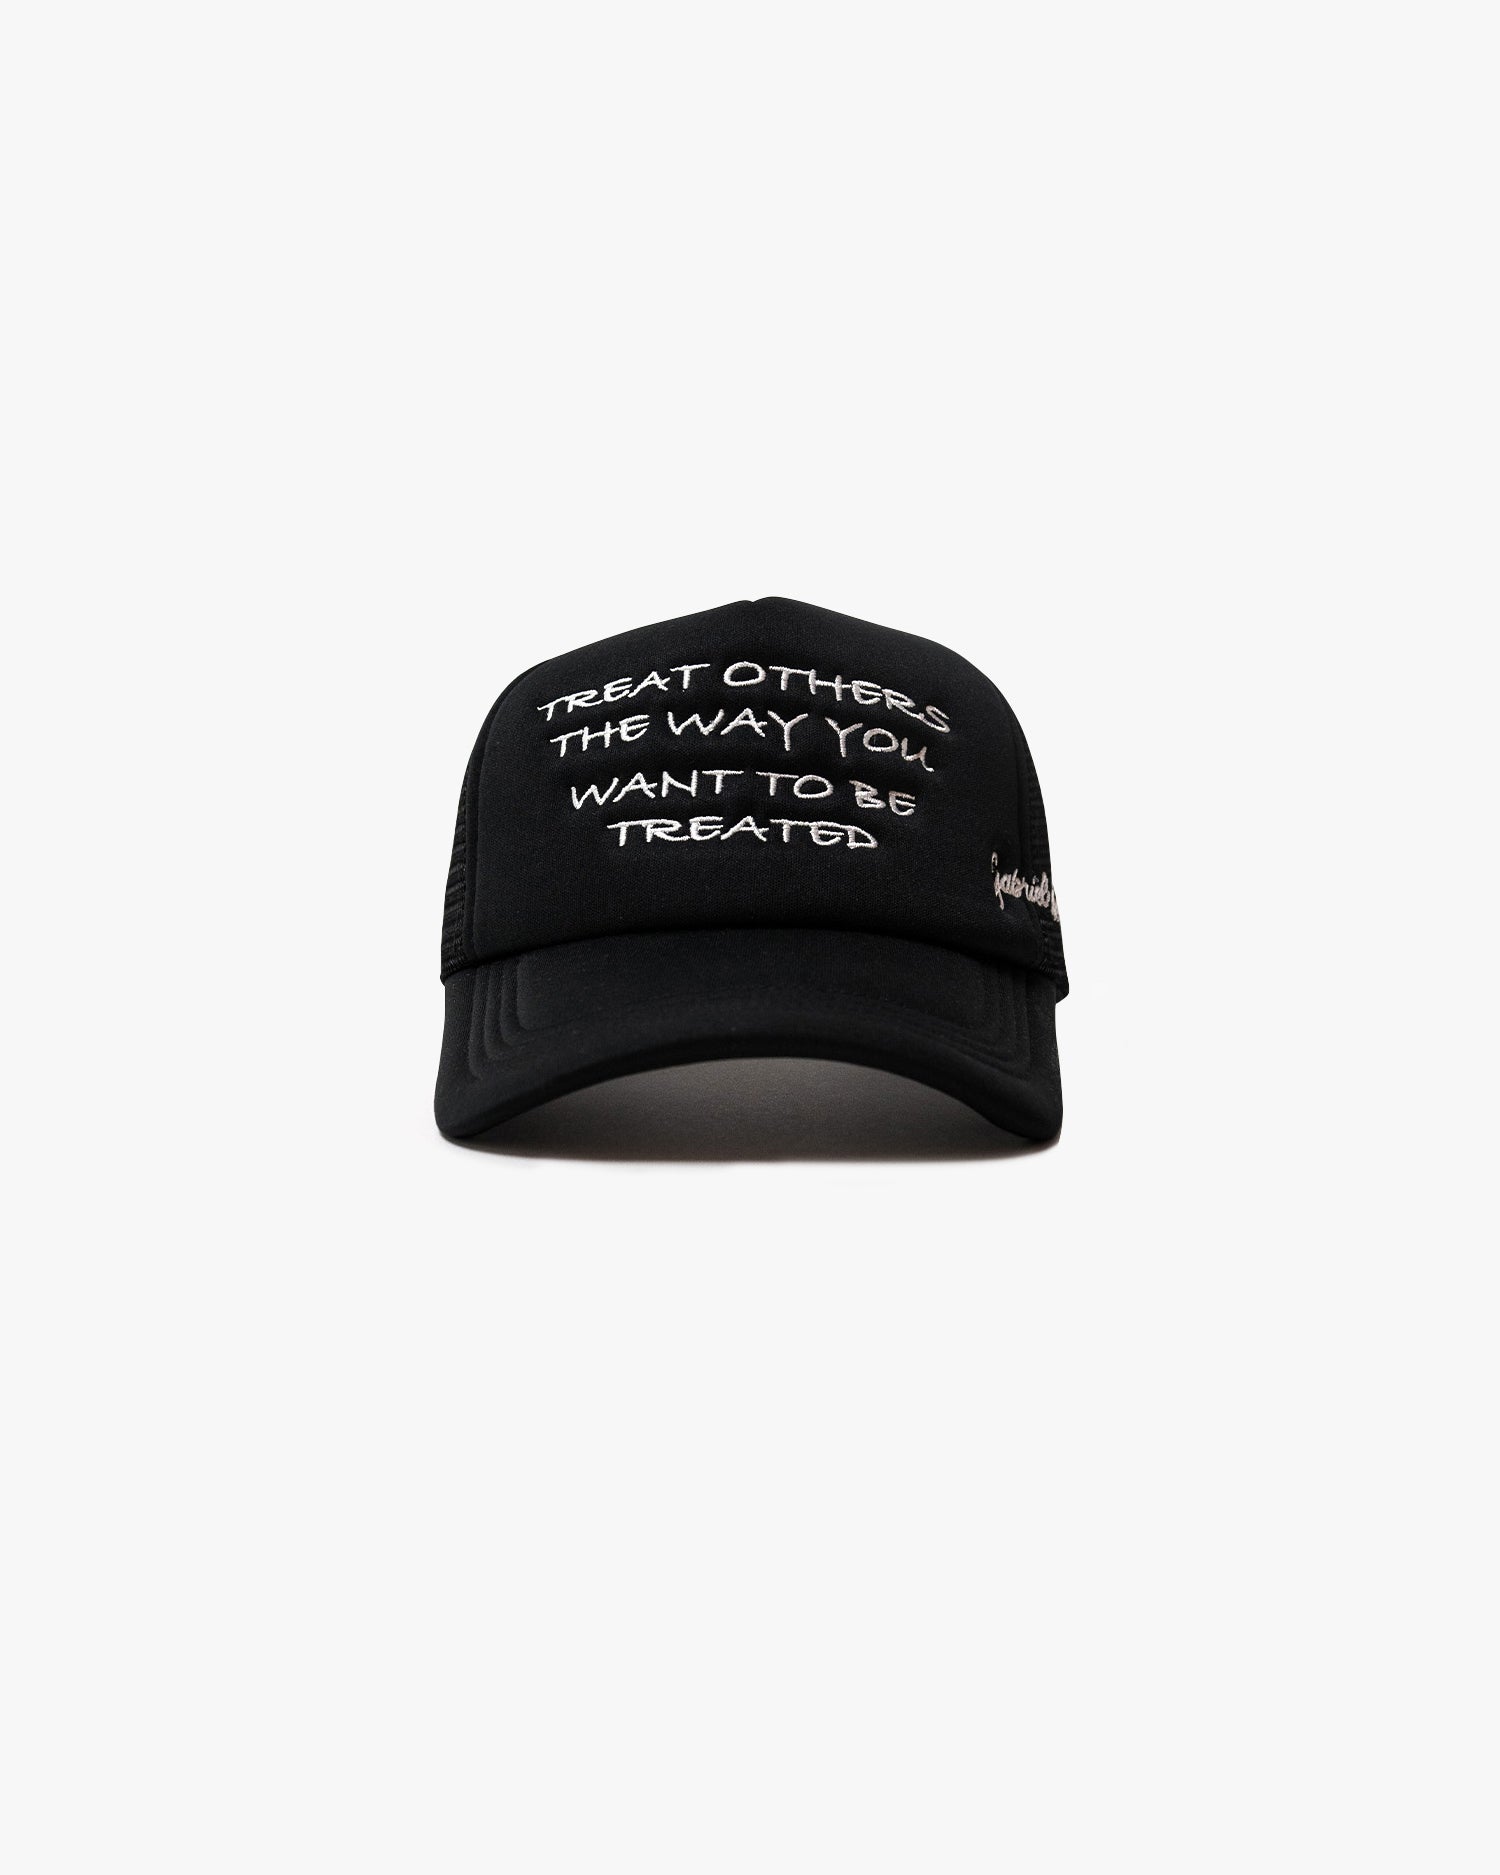 Black foam cap with statement embroidery on the front 